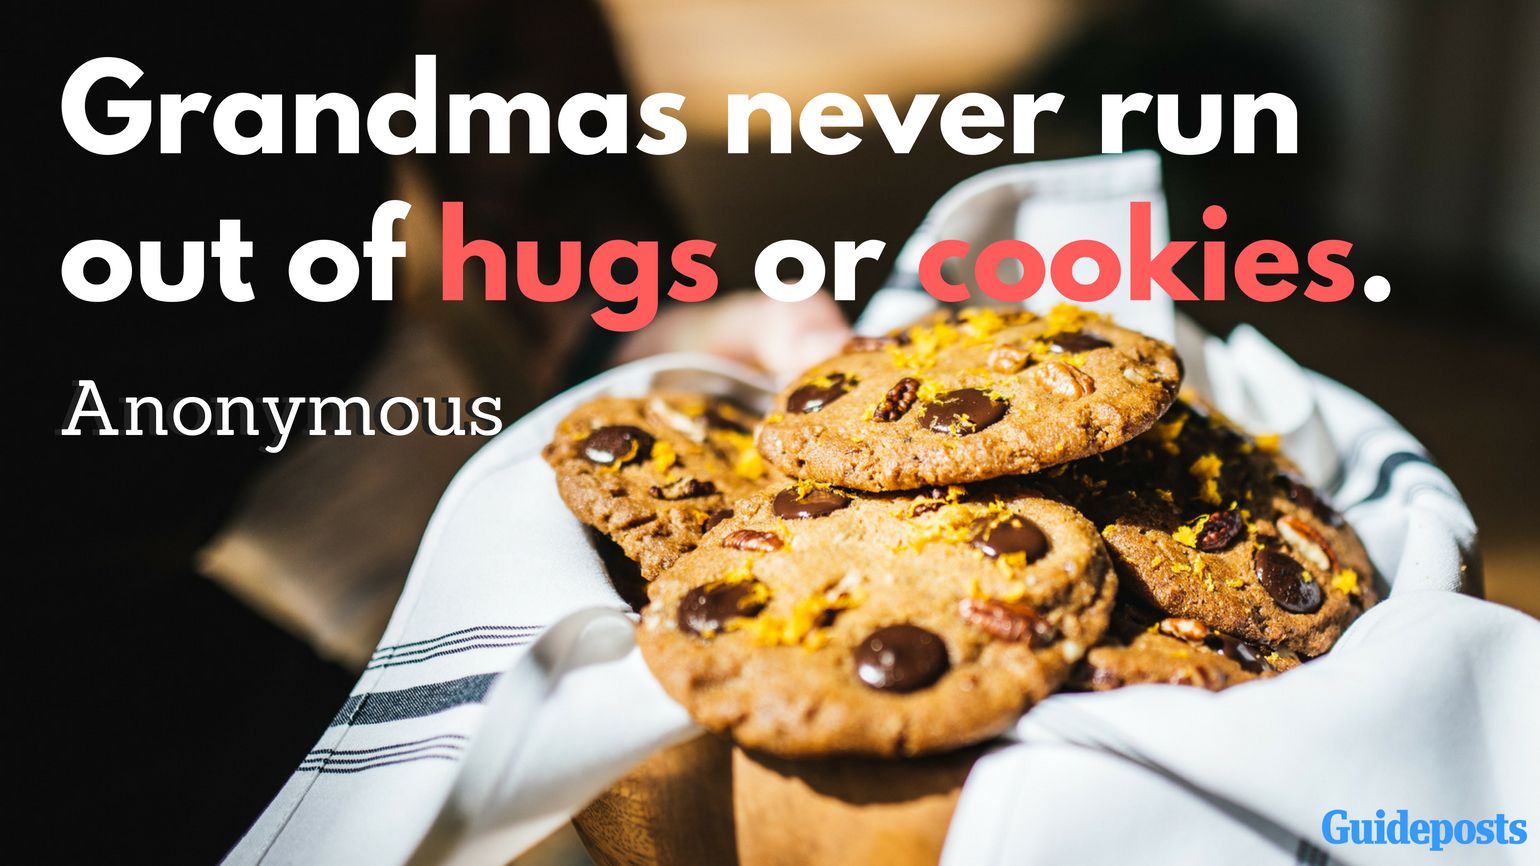 Grandmas never run out of hugs or cookies. —Anonymous